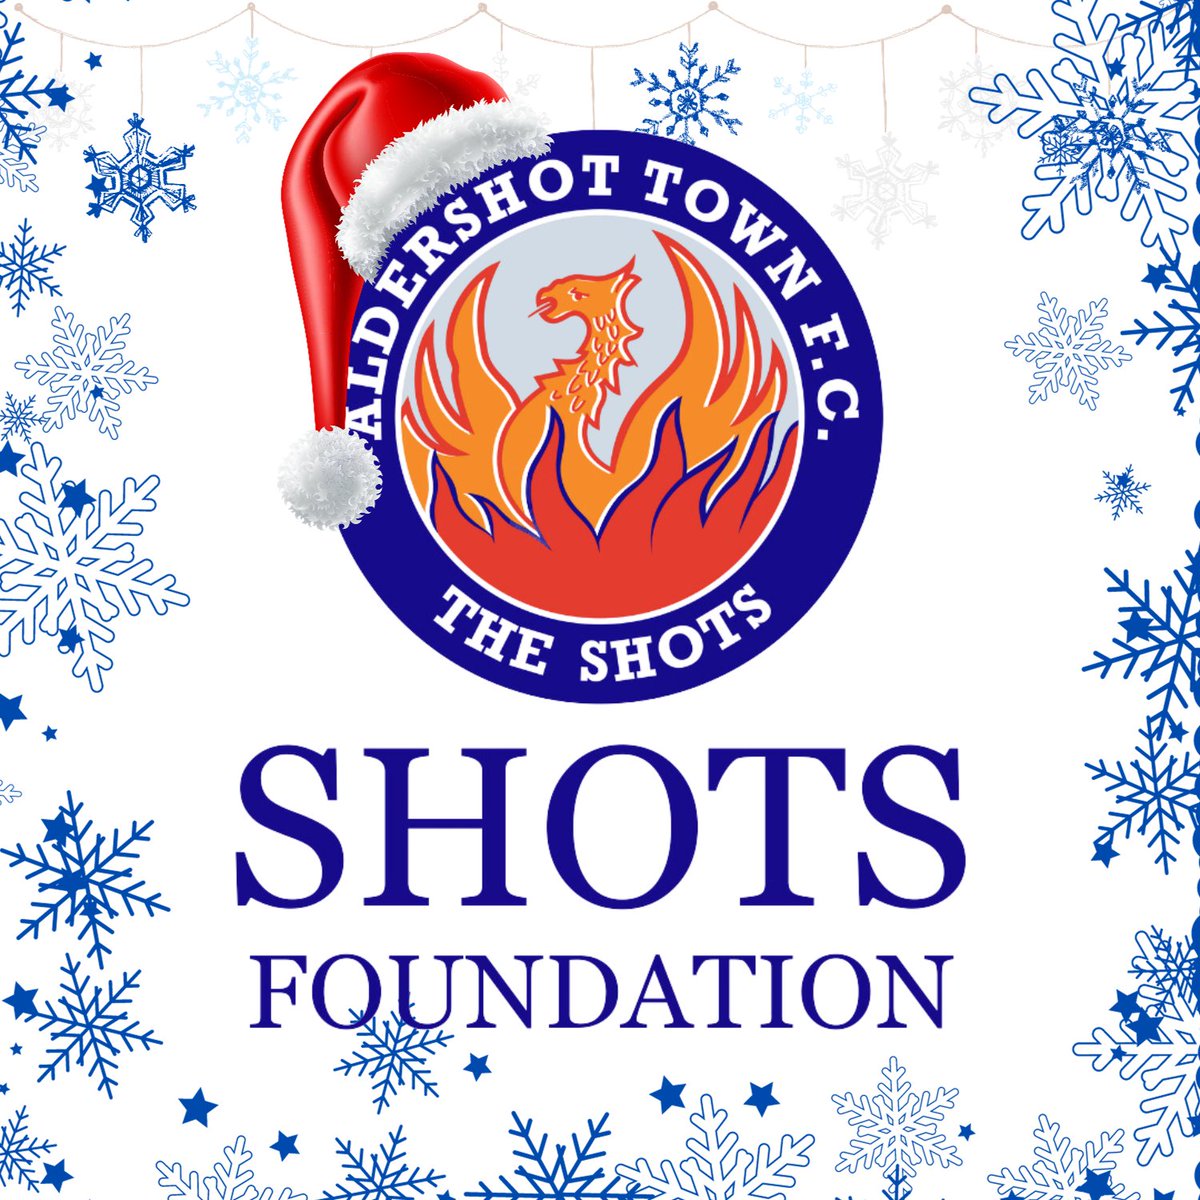 Wishing you a very Merry Christmas from all of us here at the Shots Foundation!🎄 #TheShots #community